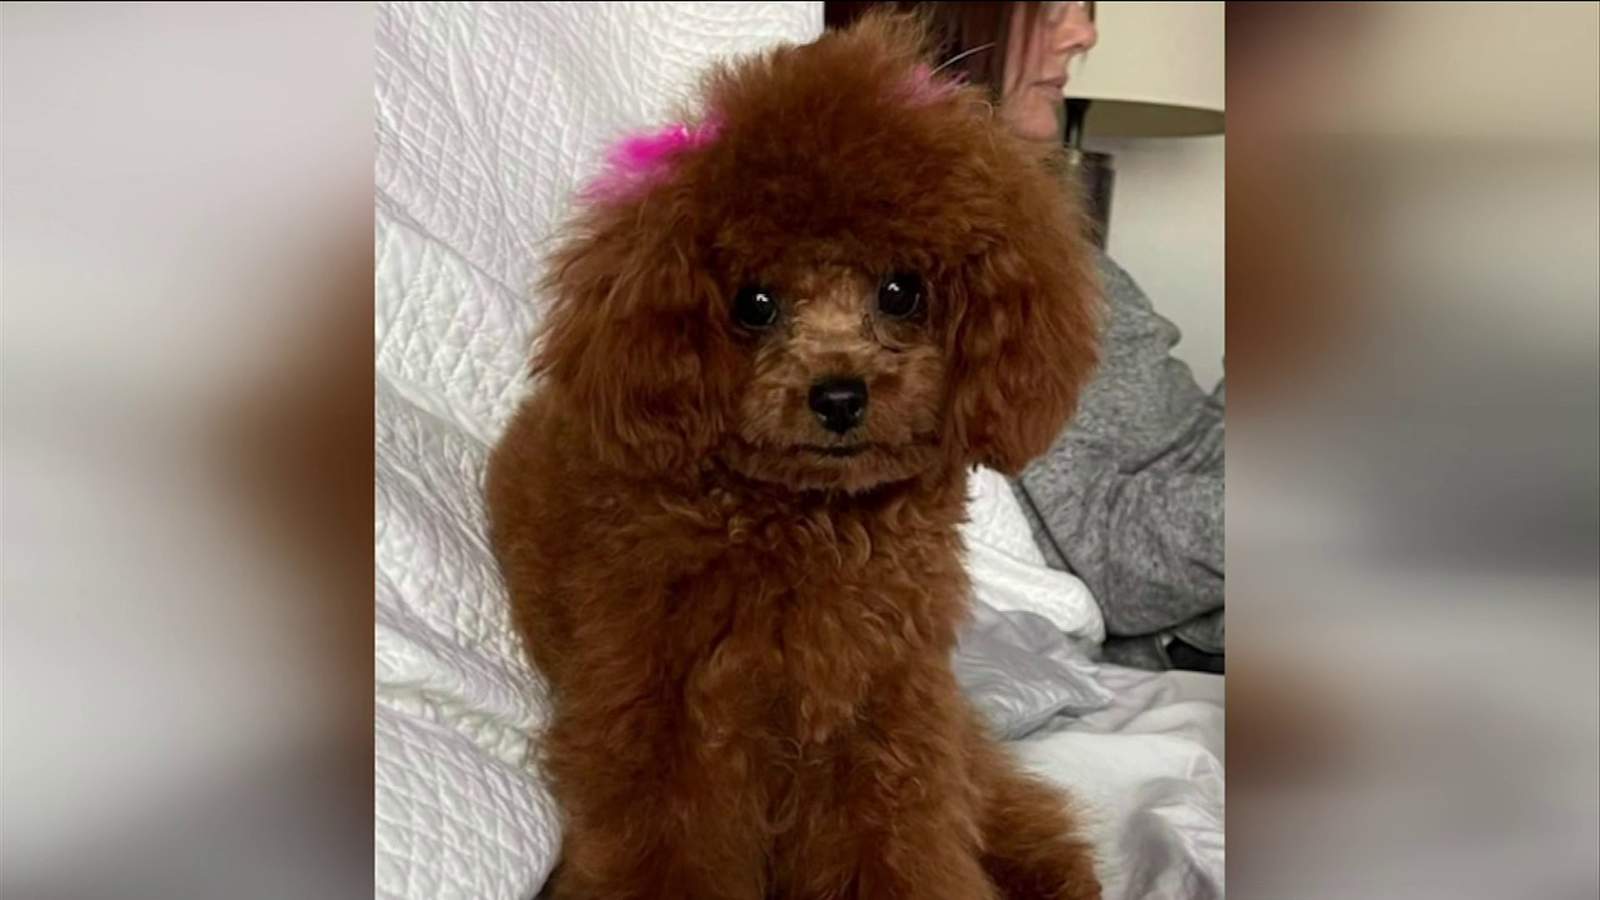 Food delivery driver accused of stealing teacup puppy from Florida condo